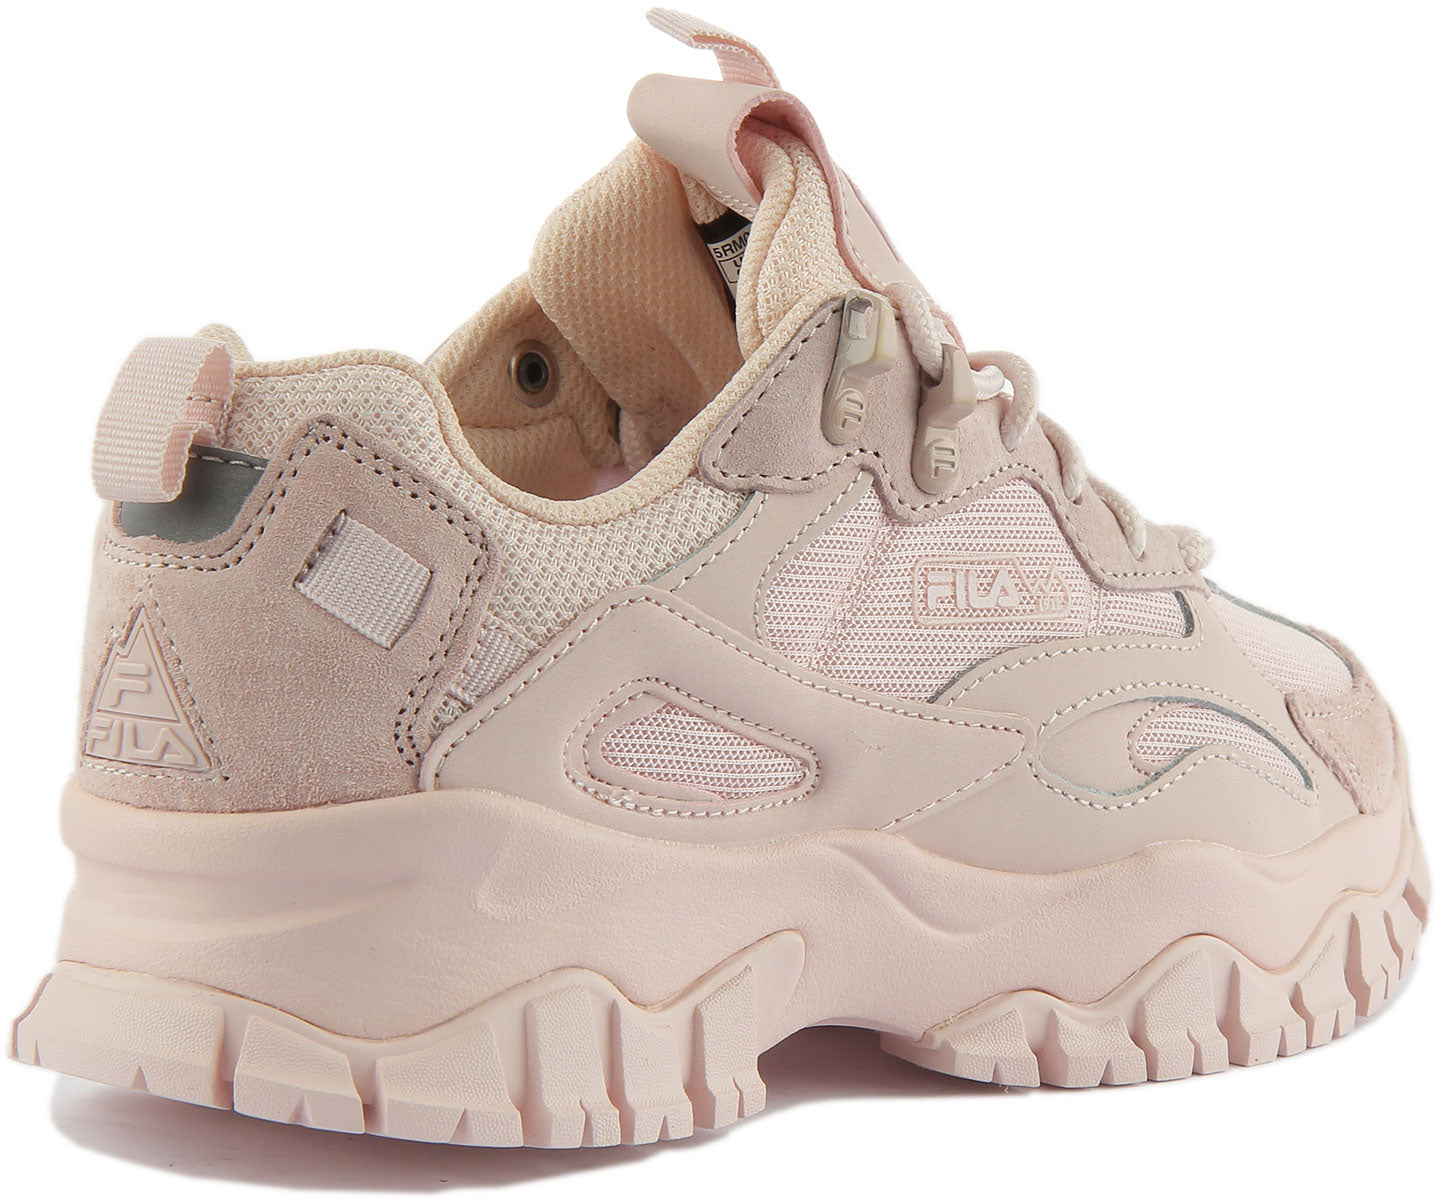 Fila Ray Tracer 2 In Rose For Women | Hiking Lace up Trainer